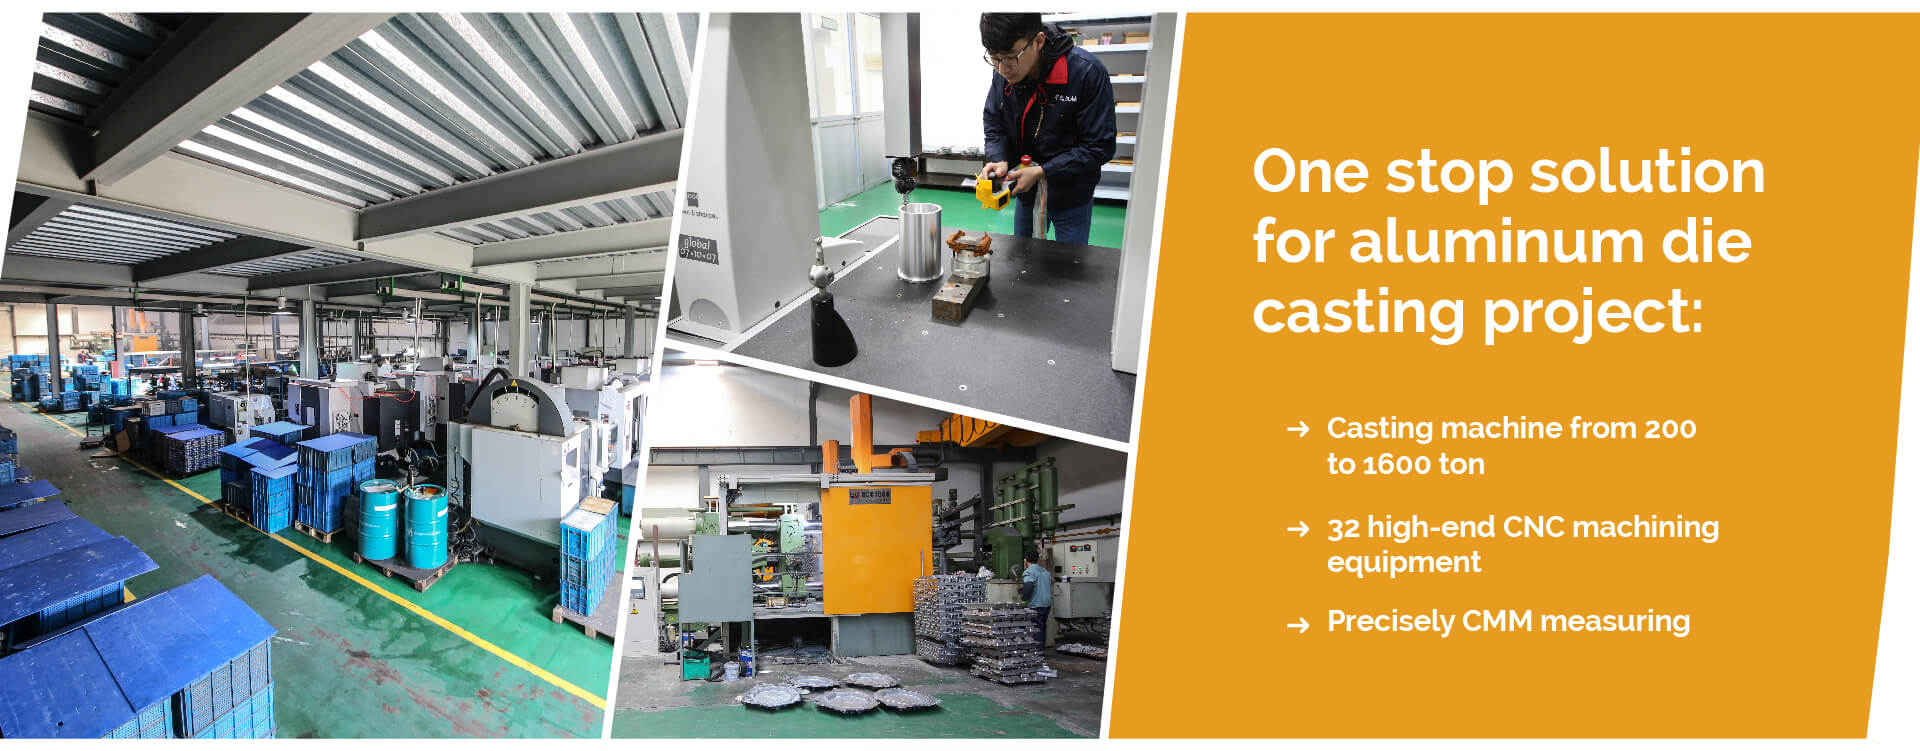 Reigstone One Stop Solution - Aluminum Die Casting Foundry